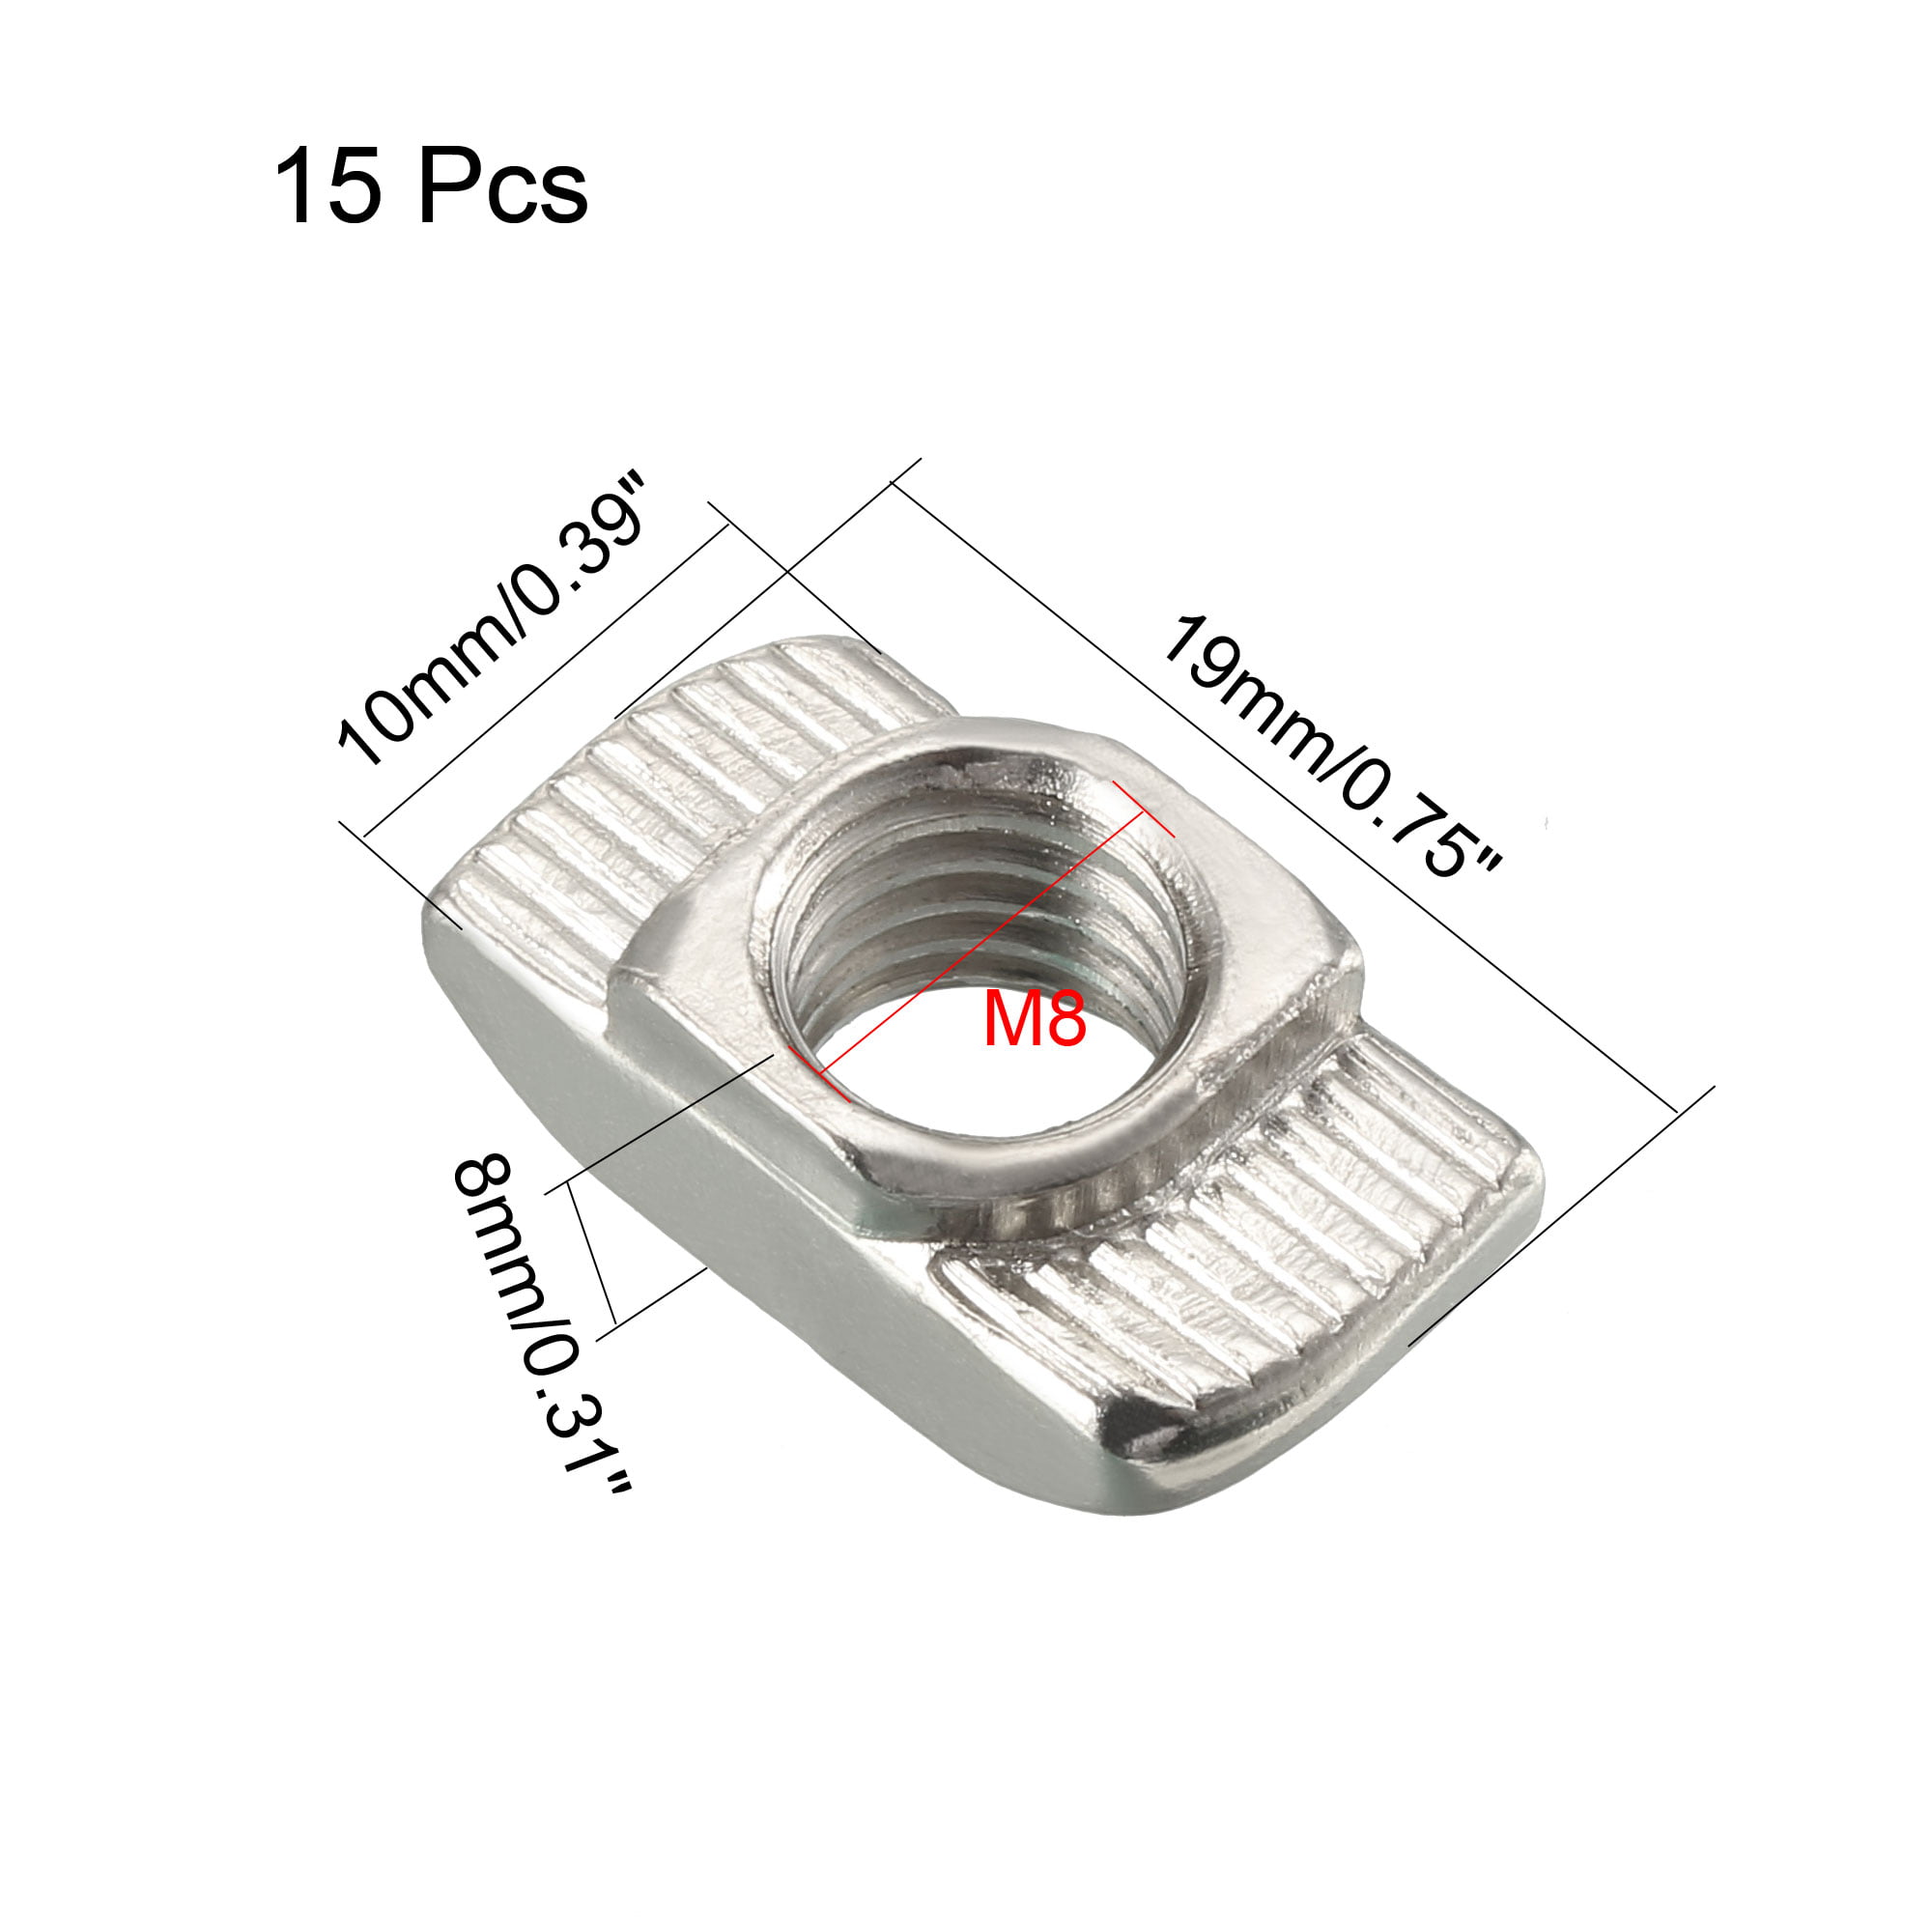 M8 Half Round roll in T-nut for 4545 Series Aluminum Extrusion Profile Nickel-Plated Carbon Steel Nuts with Slot T-Slot Pack of 10 